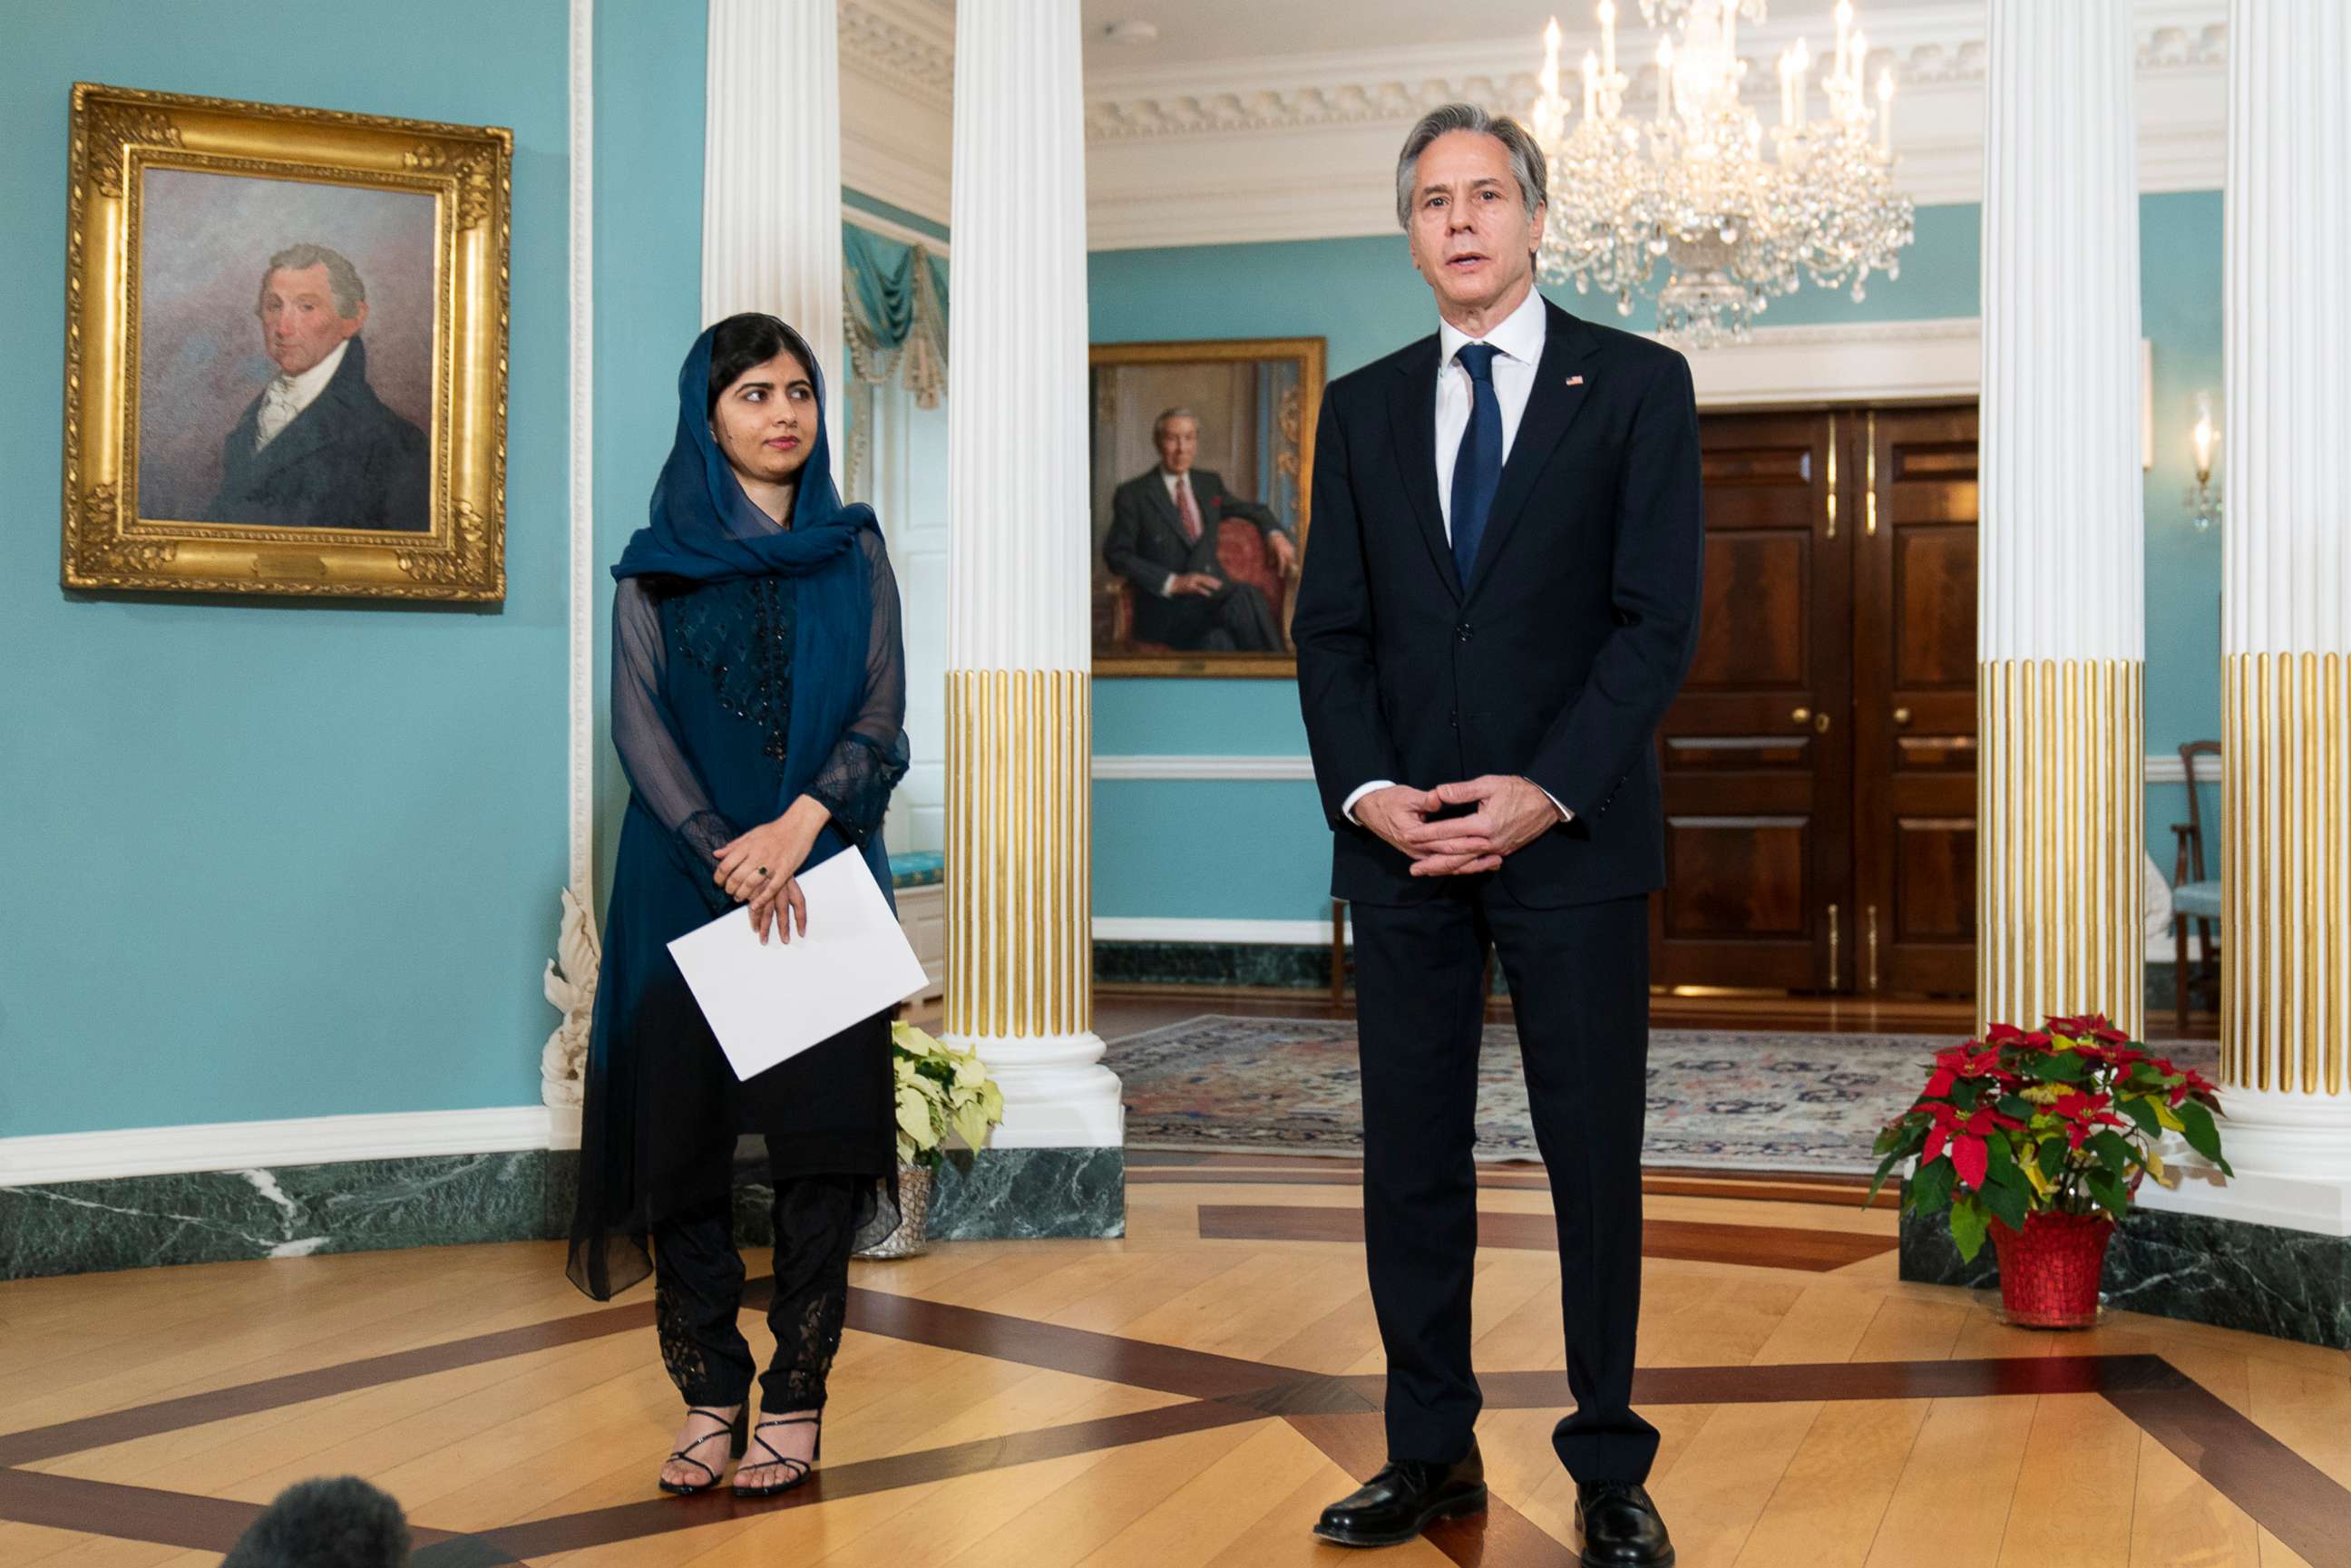 PHOTO: Human rights activist and Nobel Peace Prize winner Malala Yousafzai met with Secretary of State Antony Blinken at the State Department in Washington on Dec. 6, 2021, to advocate for the rights of Afghan women and girls.